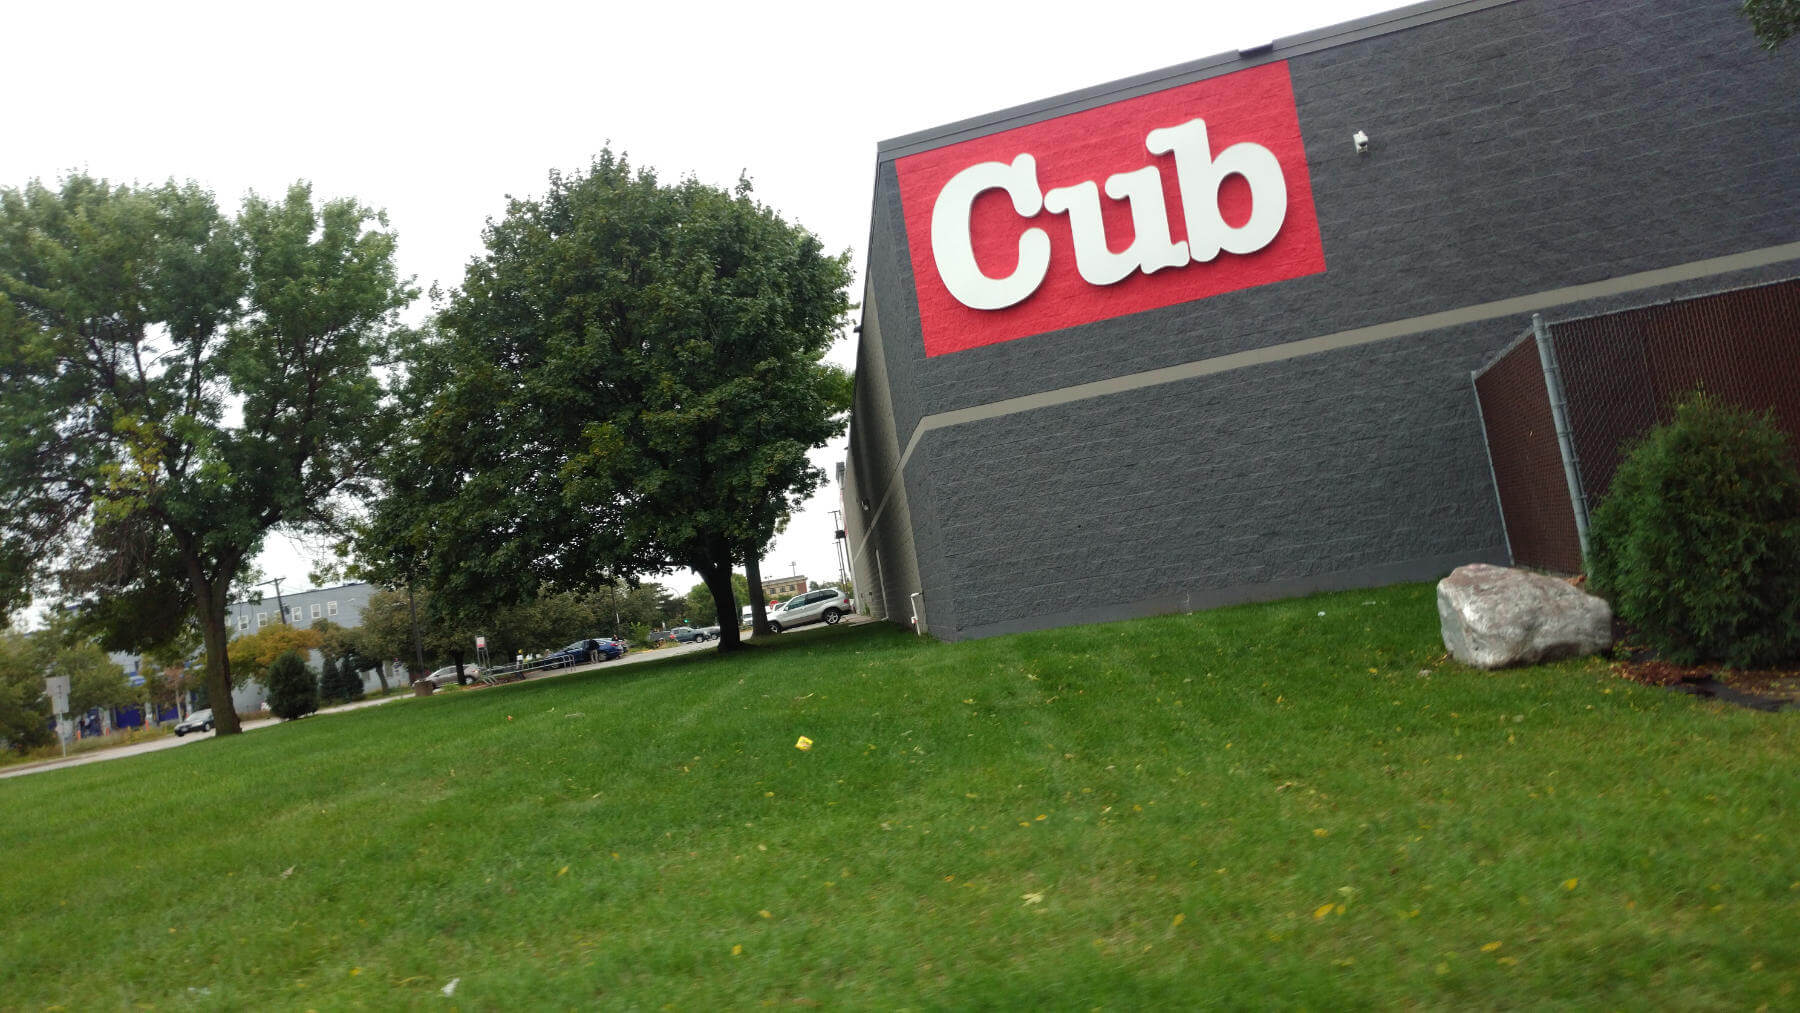 Cub sign on back of building